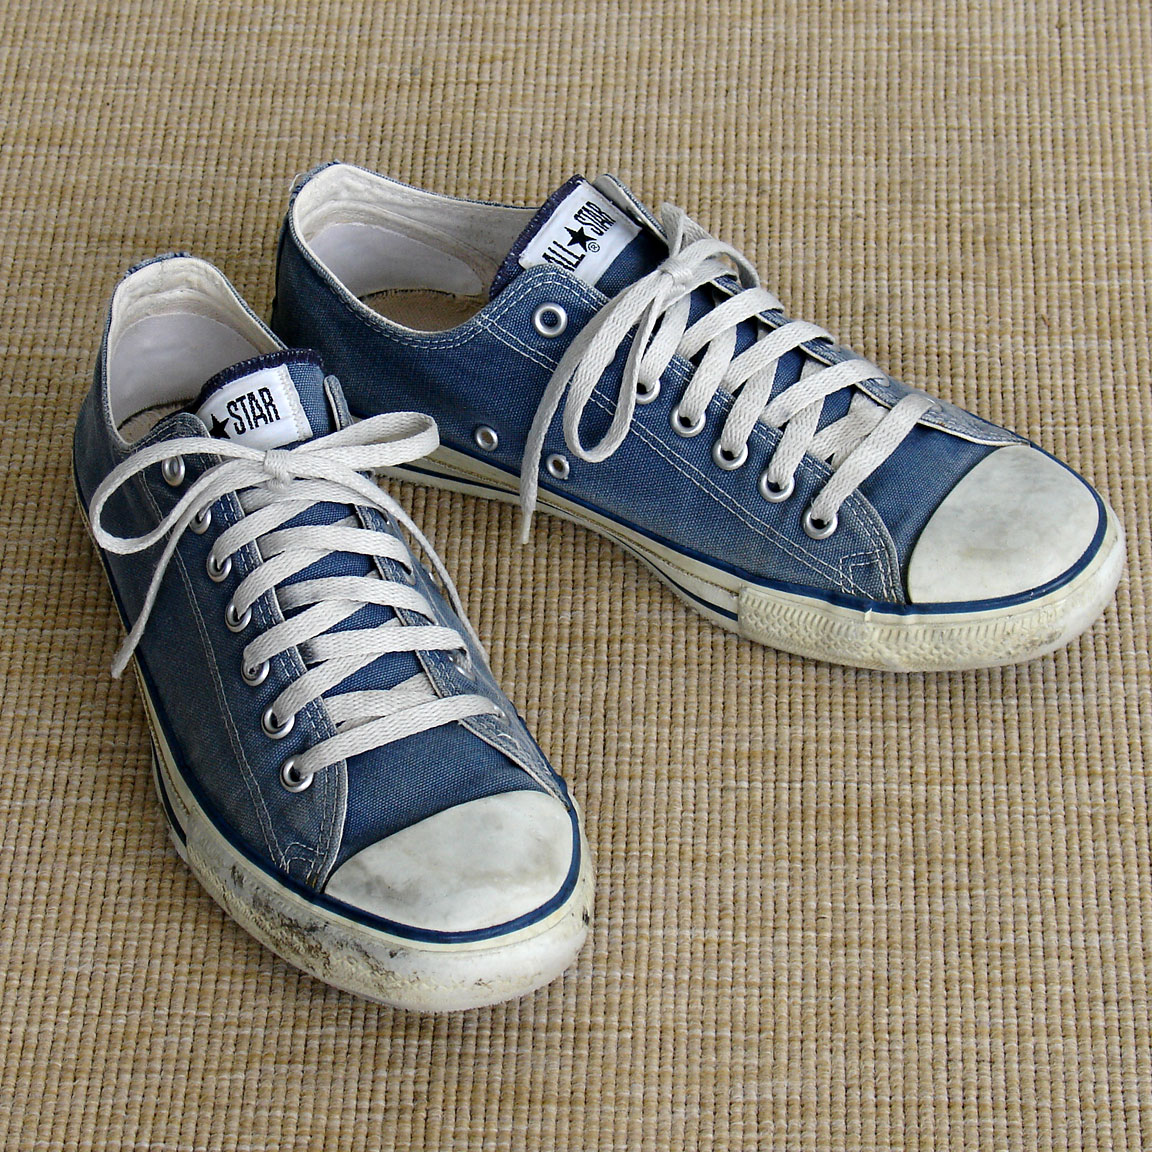 Vintage American-made classic blue Converse All Star Chuck Taylor shoes for sale at http://www.collectornet.net/shoes